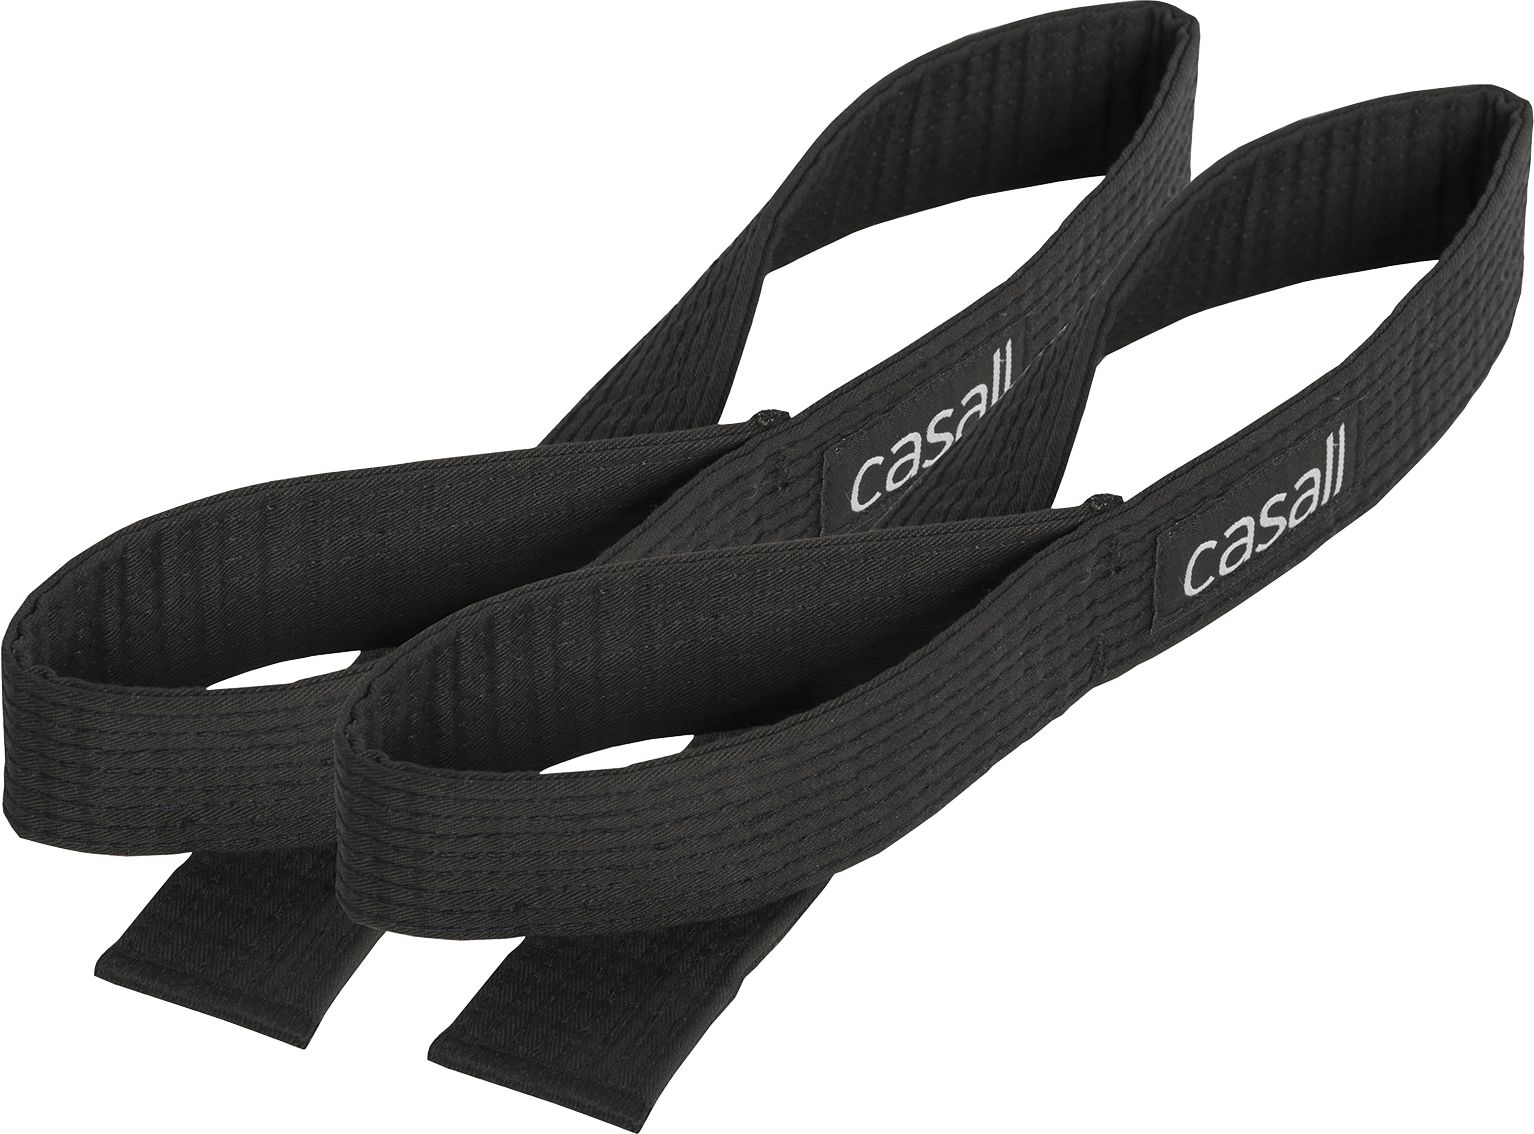 CASALL, LIFTING STRAPS